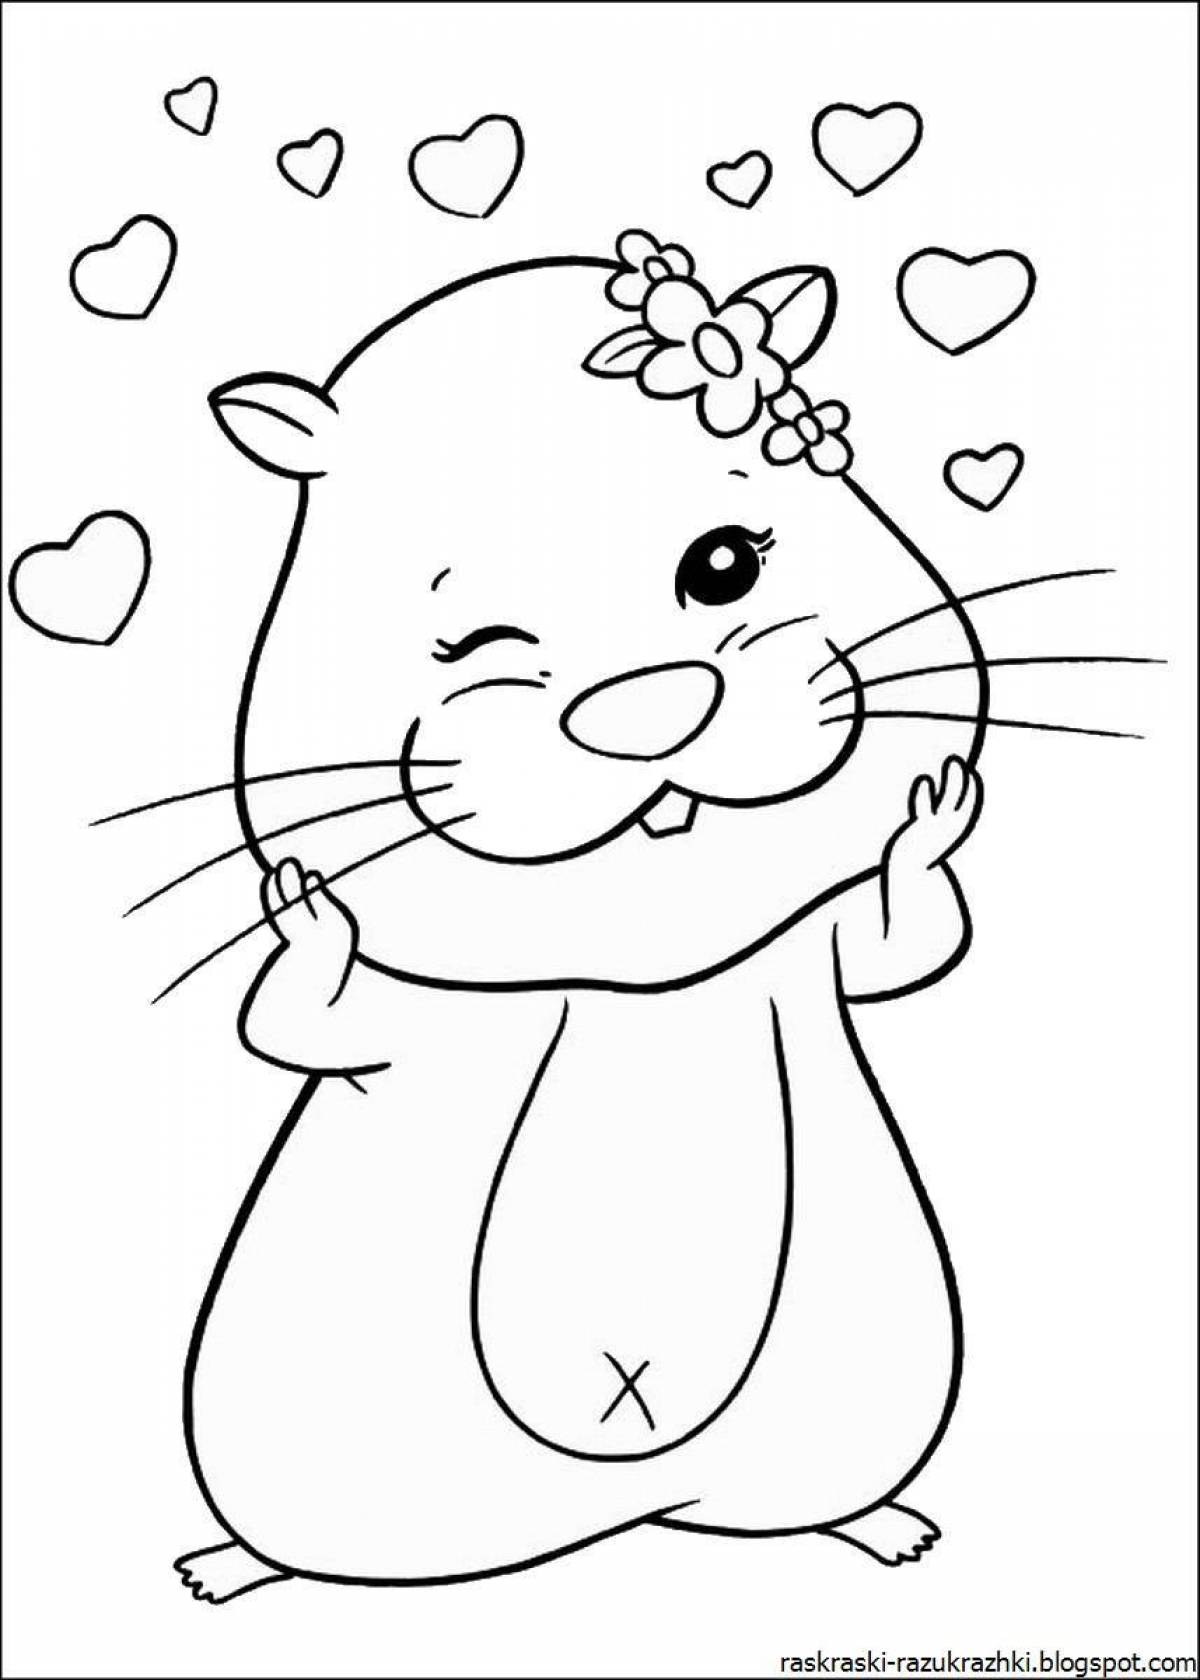 Great hamster coloring book for kids